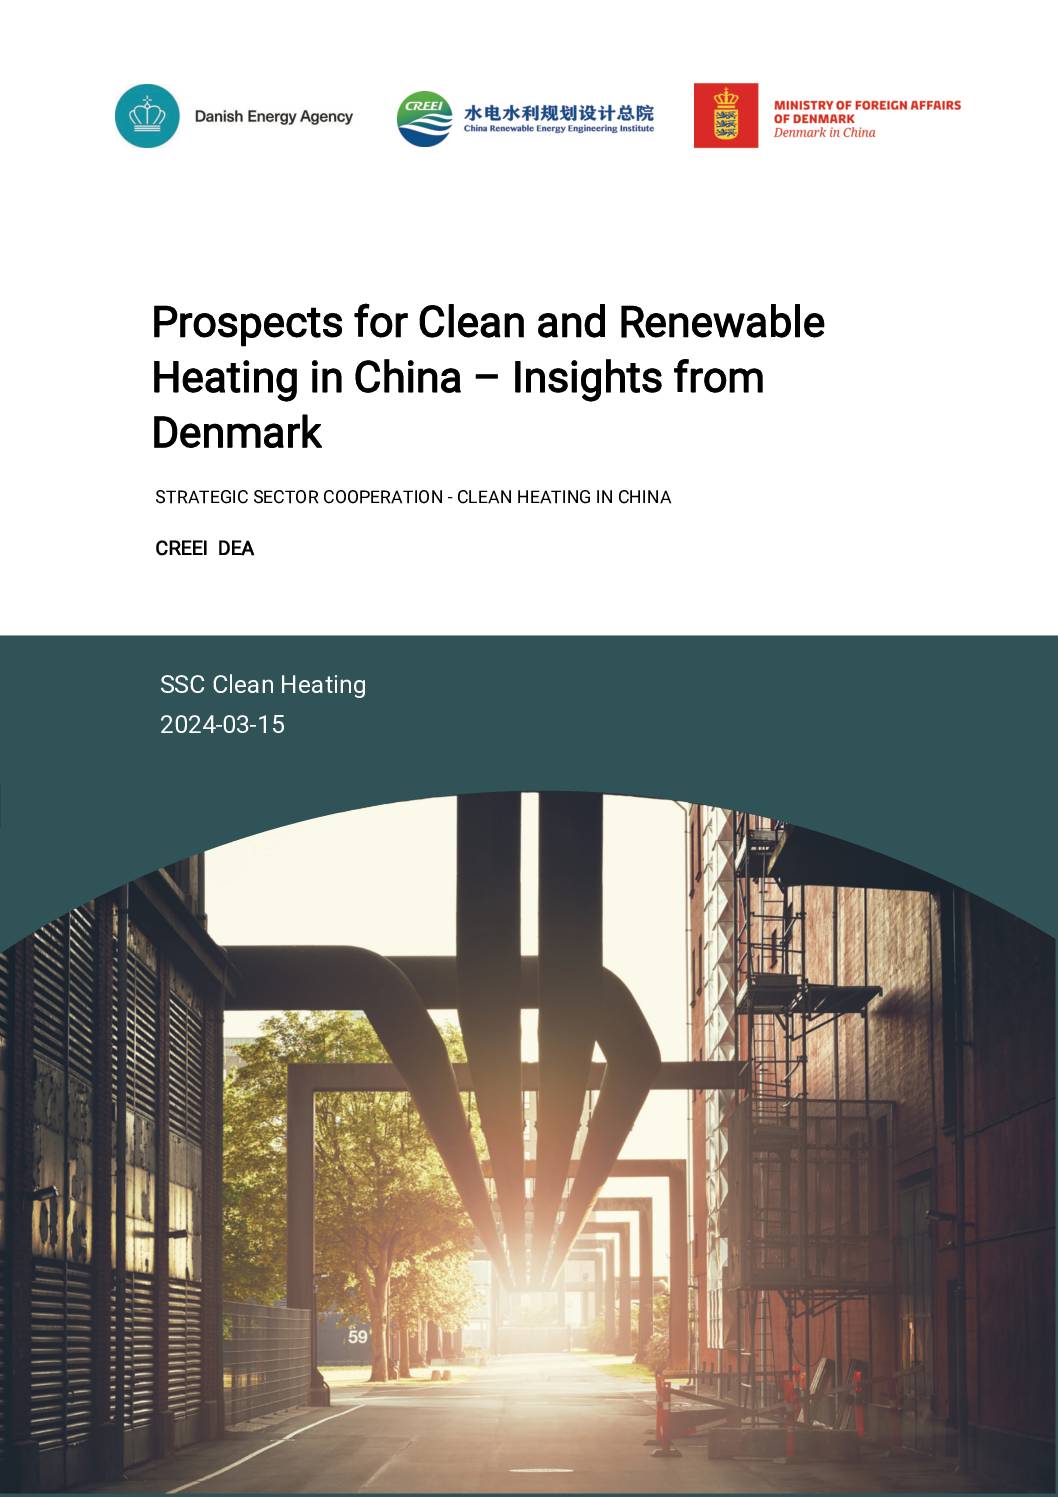 Prospects for Clean and Renewable Heating in China – Insights from Denmark